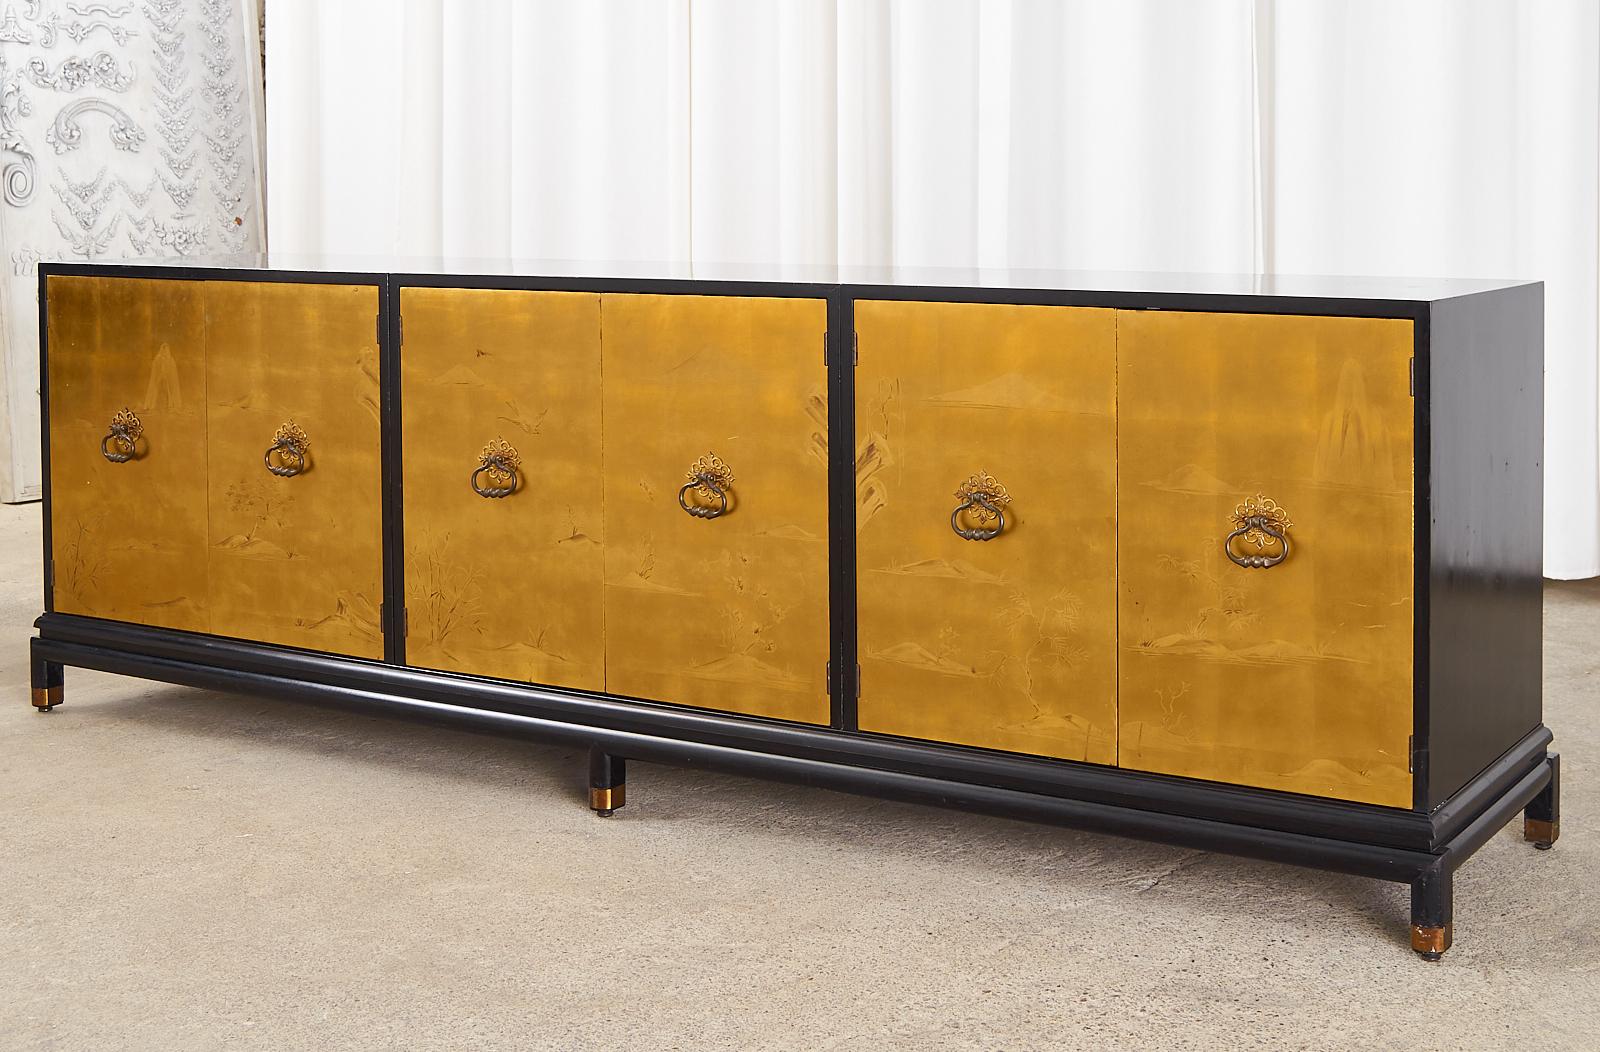 Rare Mid-Century Modern monumental 3 part sideboard cabinet or credenza designed by Renzo Rutilli (Lorenzo R. Rutilli 1901-1966) for Johnson Furniture Company. The cabinet features a three section case each with double doors opening to storage